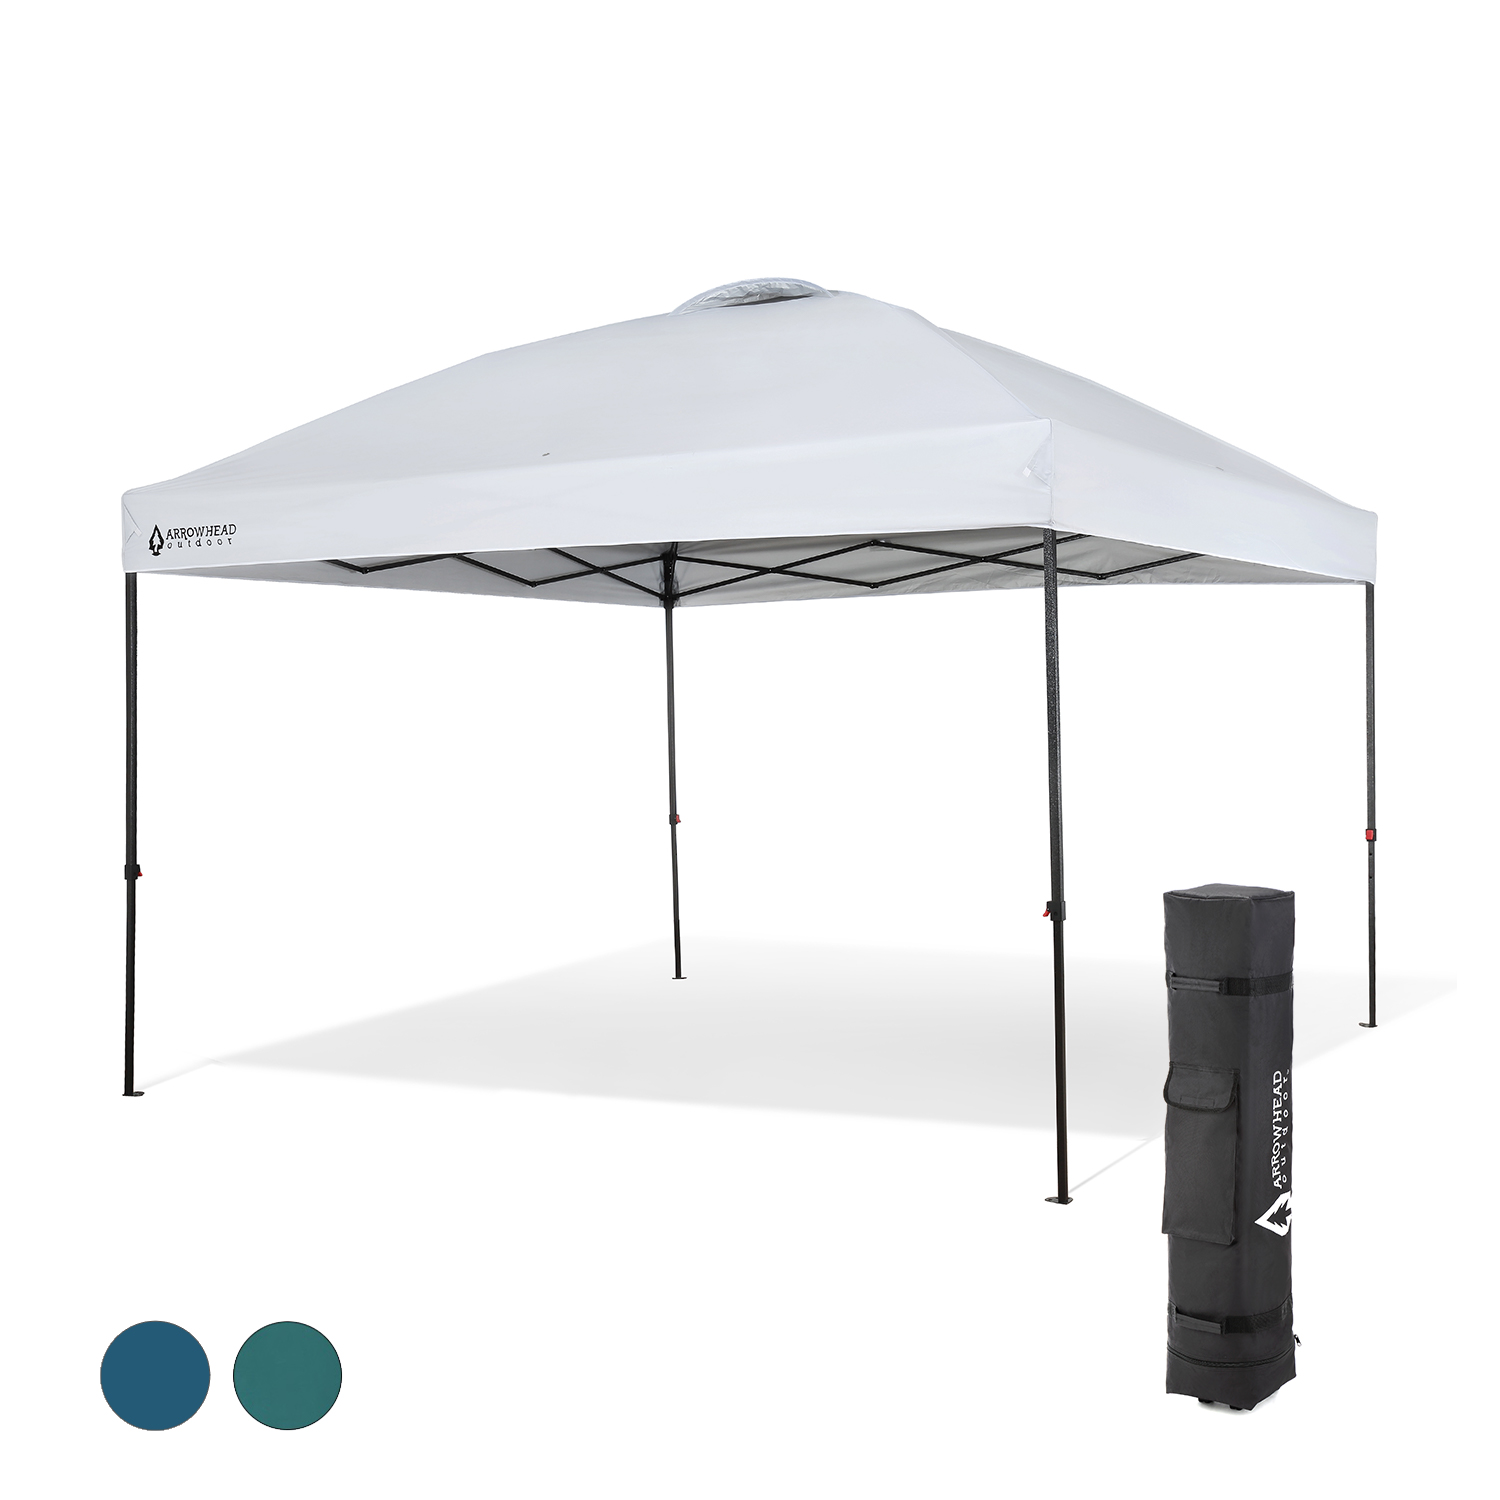 ARROWHEAD OUTDOOR 12’x12’ Pop-Up Canopy & Instant Shelter, Easy One Person Setup, Water & UV Resistant 150D Fabric Construction, Height Adjustable, Carry Bag, Guide Ropes & Stakes Included, USA-Based - image 1 of 16